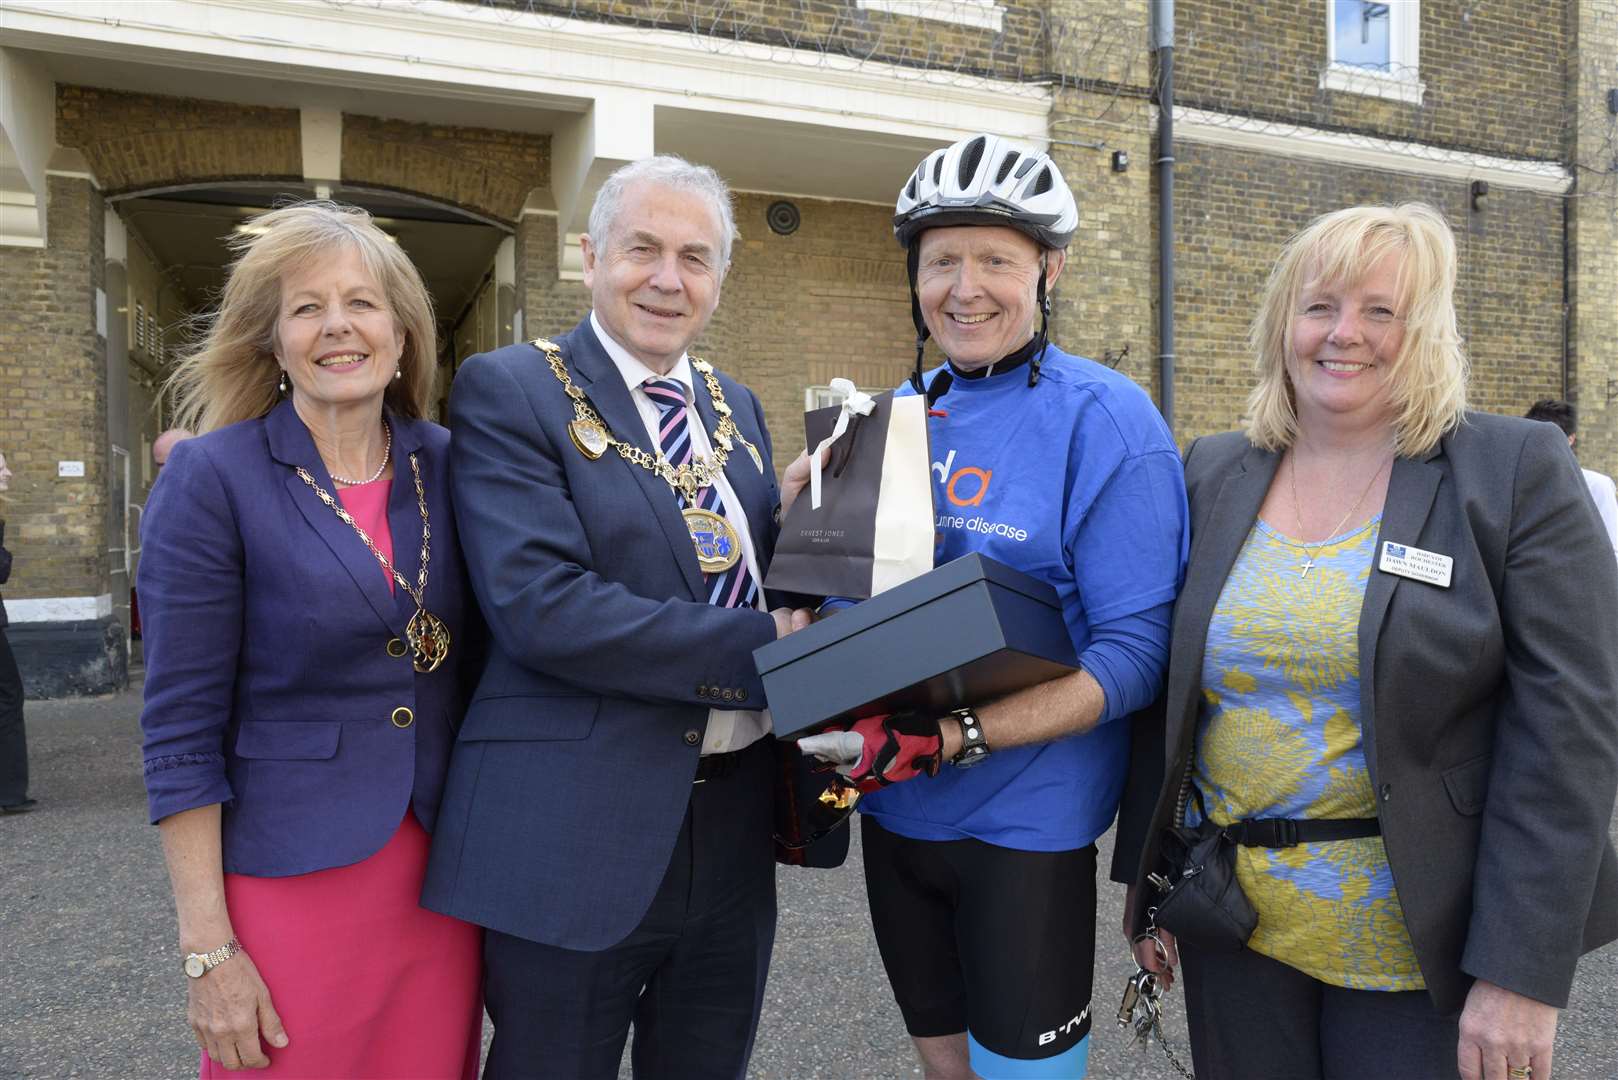 Dawn pictured in 2017 with former Mayoress Sarah Tranter and Mayor Stuart Tranter, presenting Andy Rowett with his 30-year service award. Picture: Chris Davey